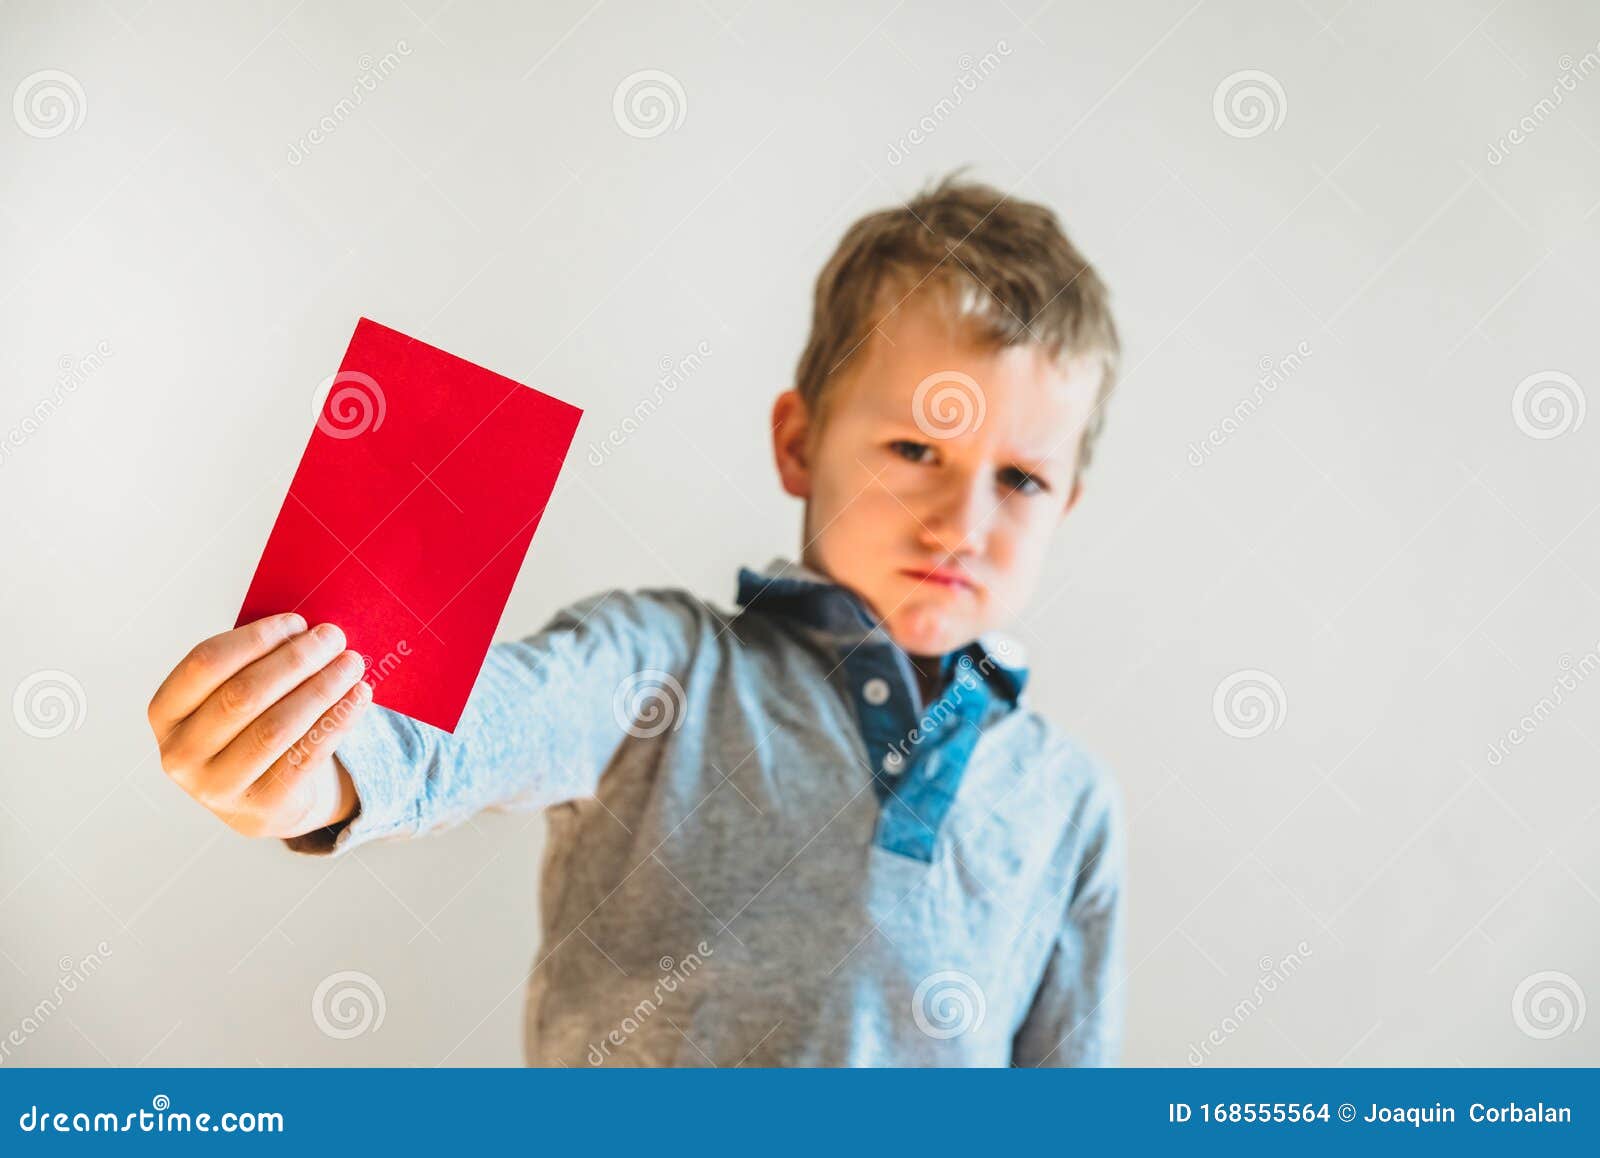 Scared Child With Red Anti Bullying Card Stock Photo